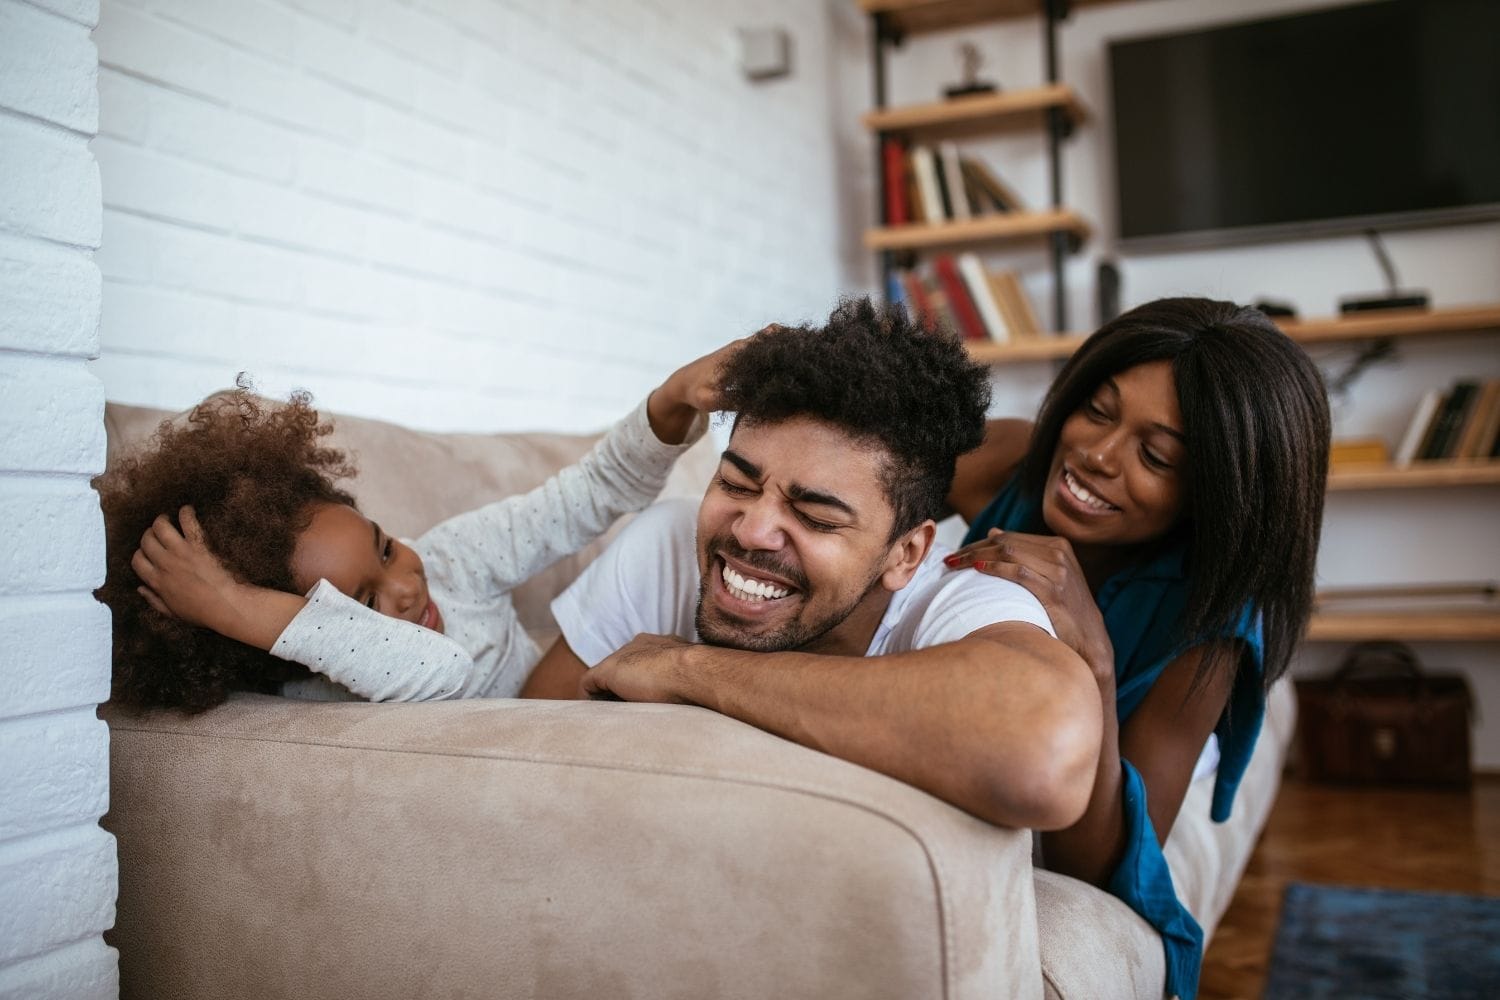 Family of three relax on couch, laughing